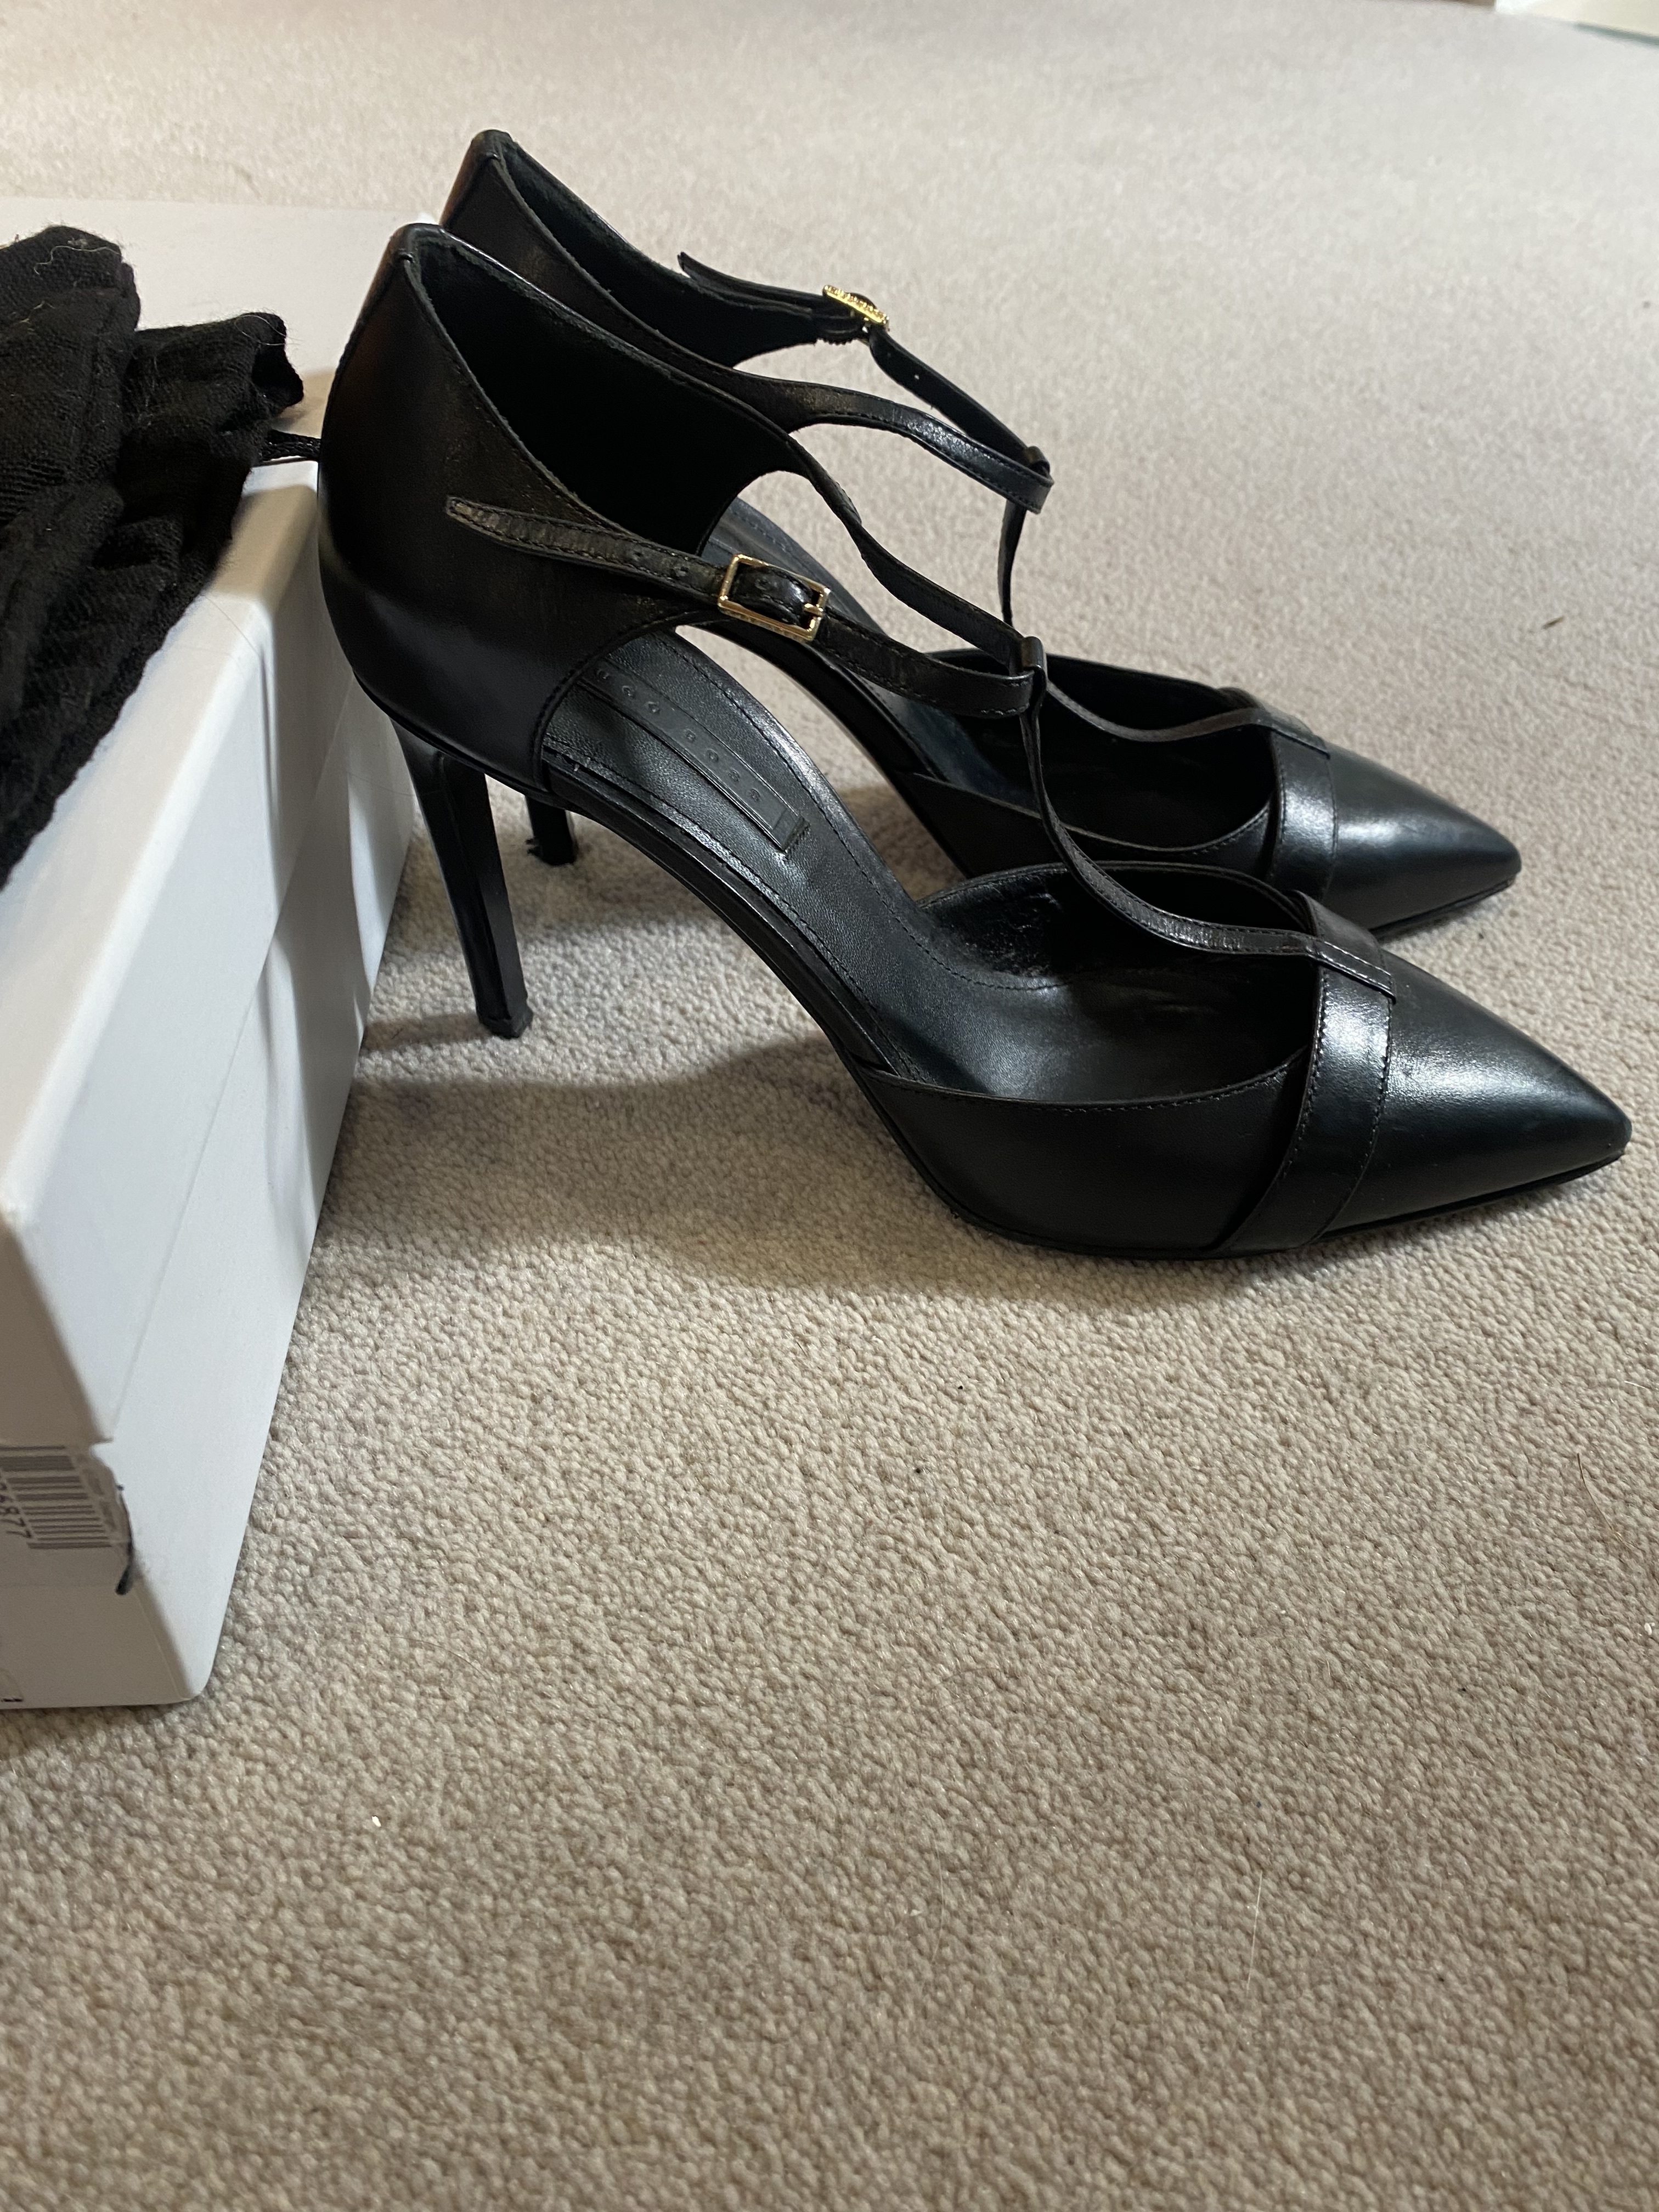 Black Hugo Boss ladies shoes size 5 - SL Pre-Loved Marketplace - The SL ...